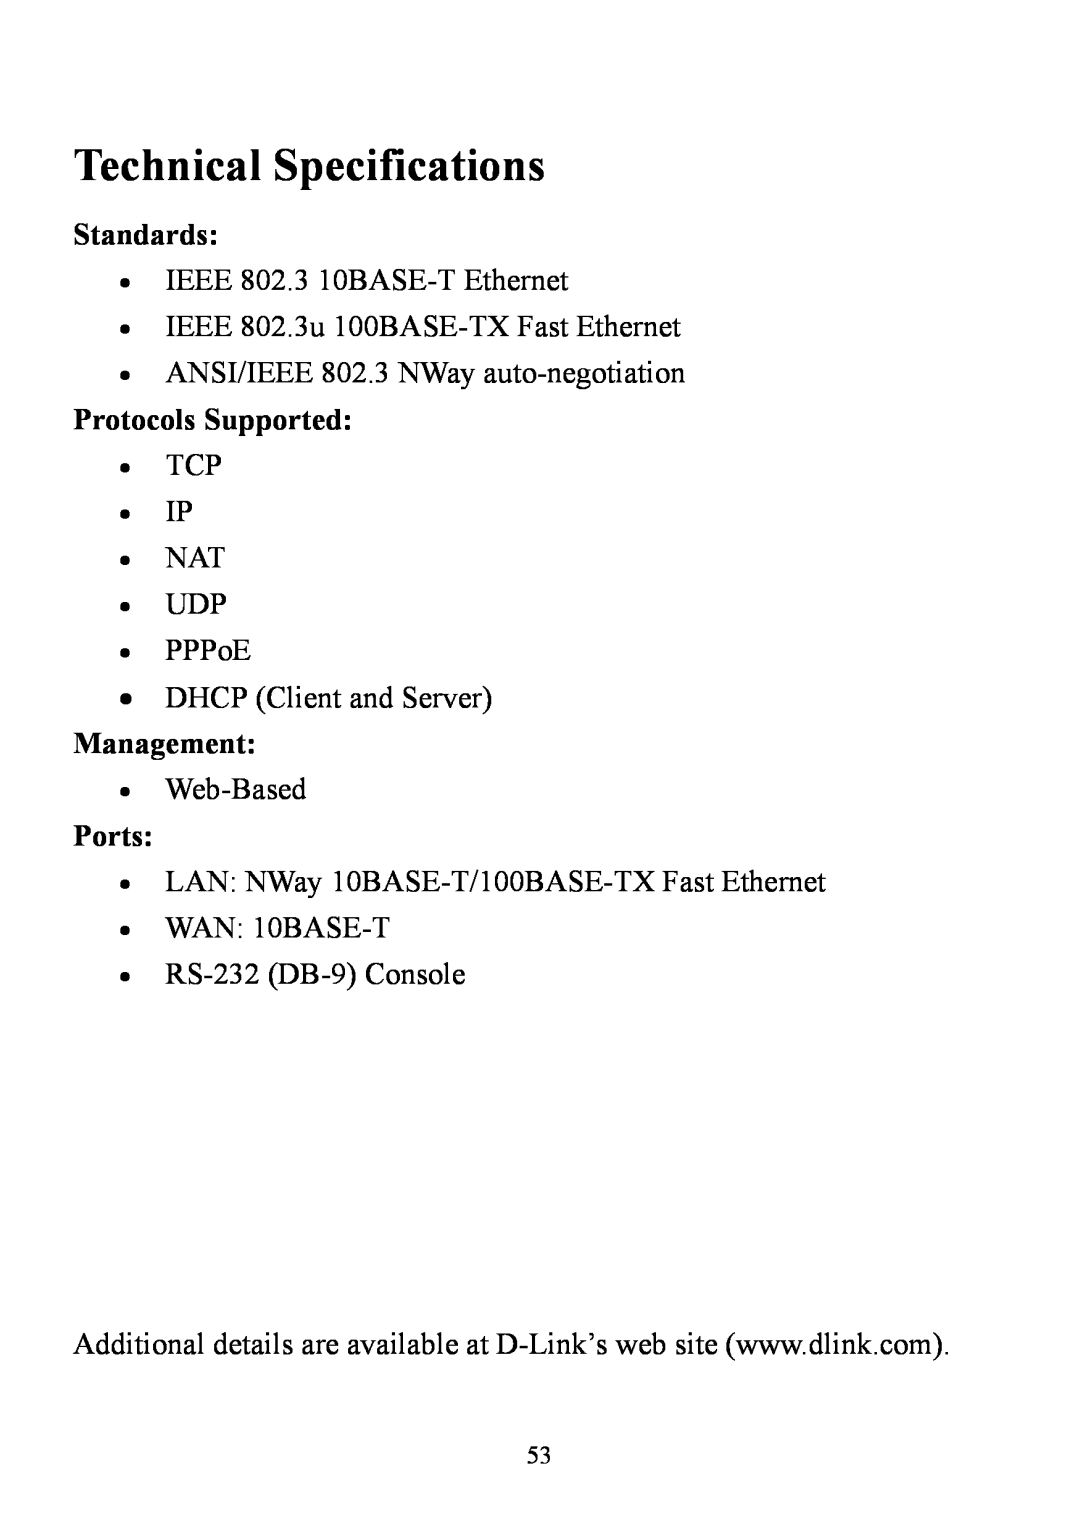 D-Link DI-714 user manual Technical Specifications, Standards, Protocols Supported, Management, Ports 